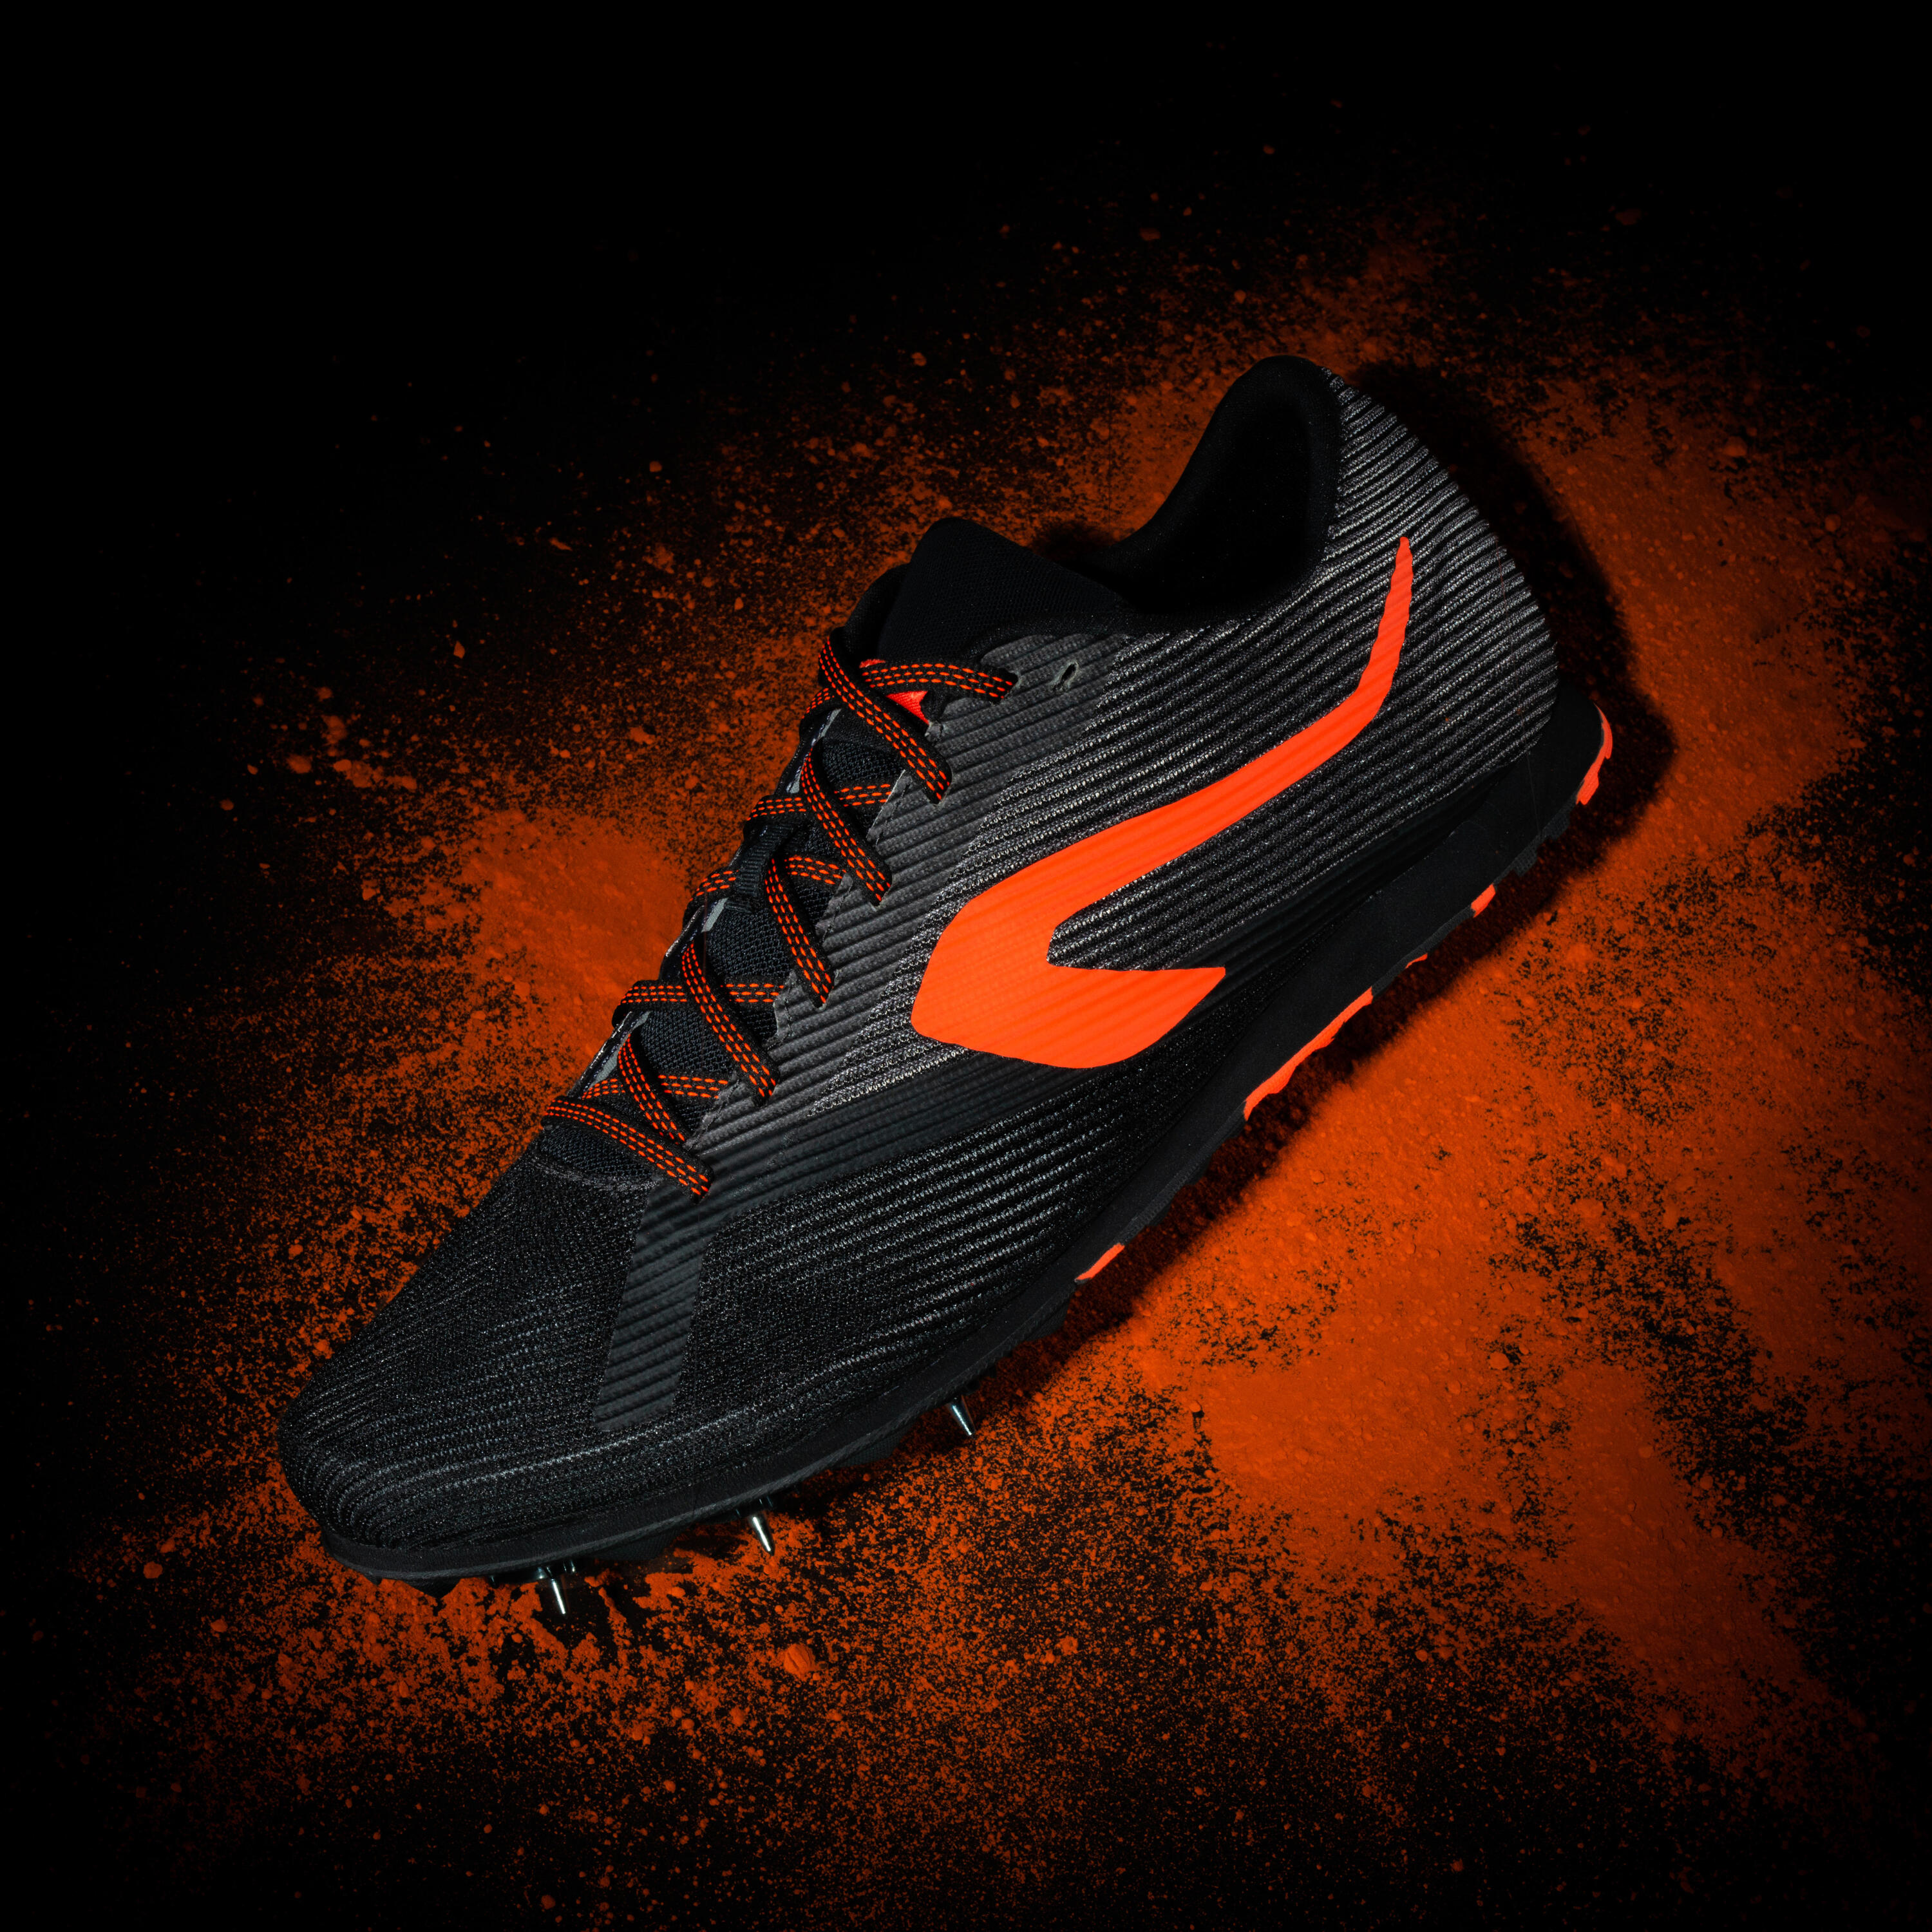 ATHLETICS CROSS-COUNTRY SHOES WITH SPIKES - BLACK/ORANGE 2/8